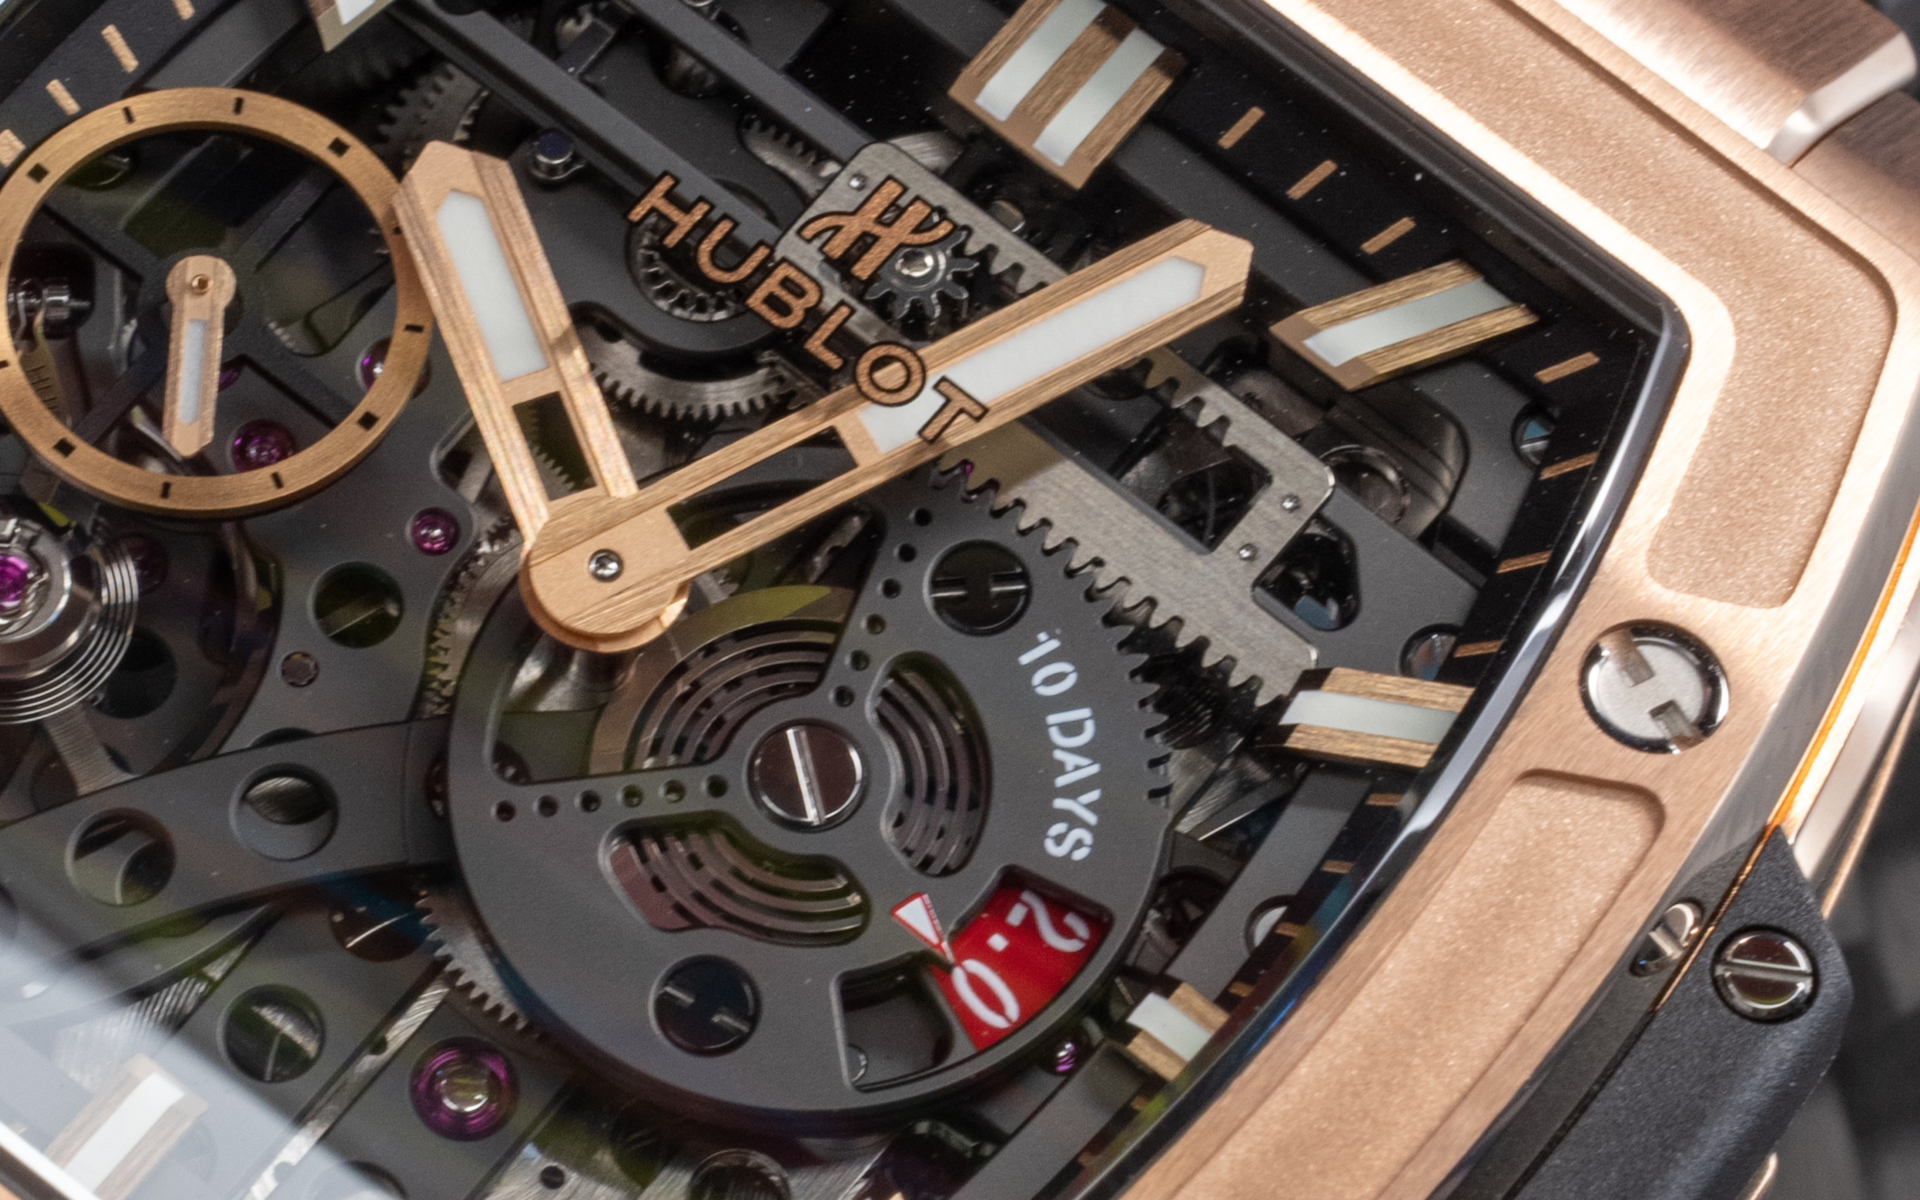 VIDEO: The Hublot Spirit of Big Bang Meca-10 King Gold with 240 hours power reserve is testosterone-drenched tech at its absolute finest